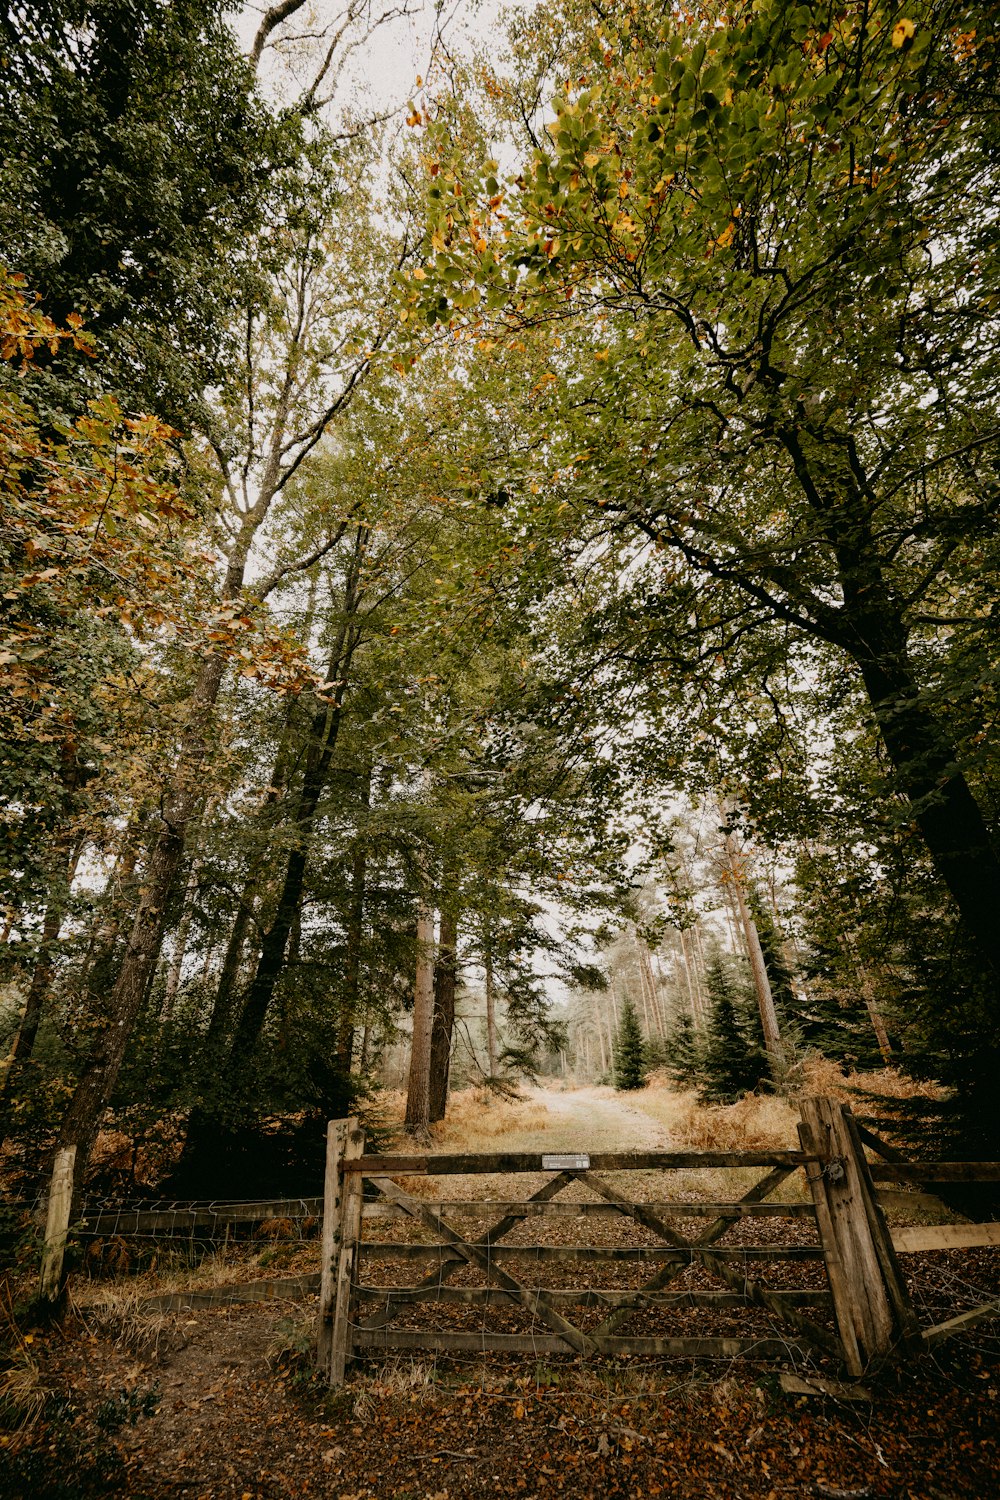 a gate in the middle of a forest surrounded by trees